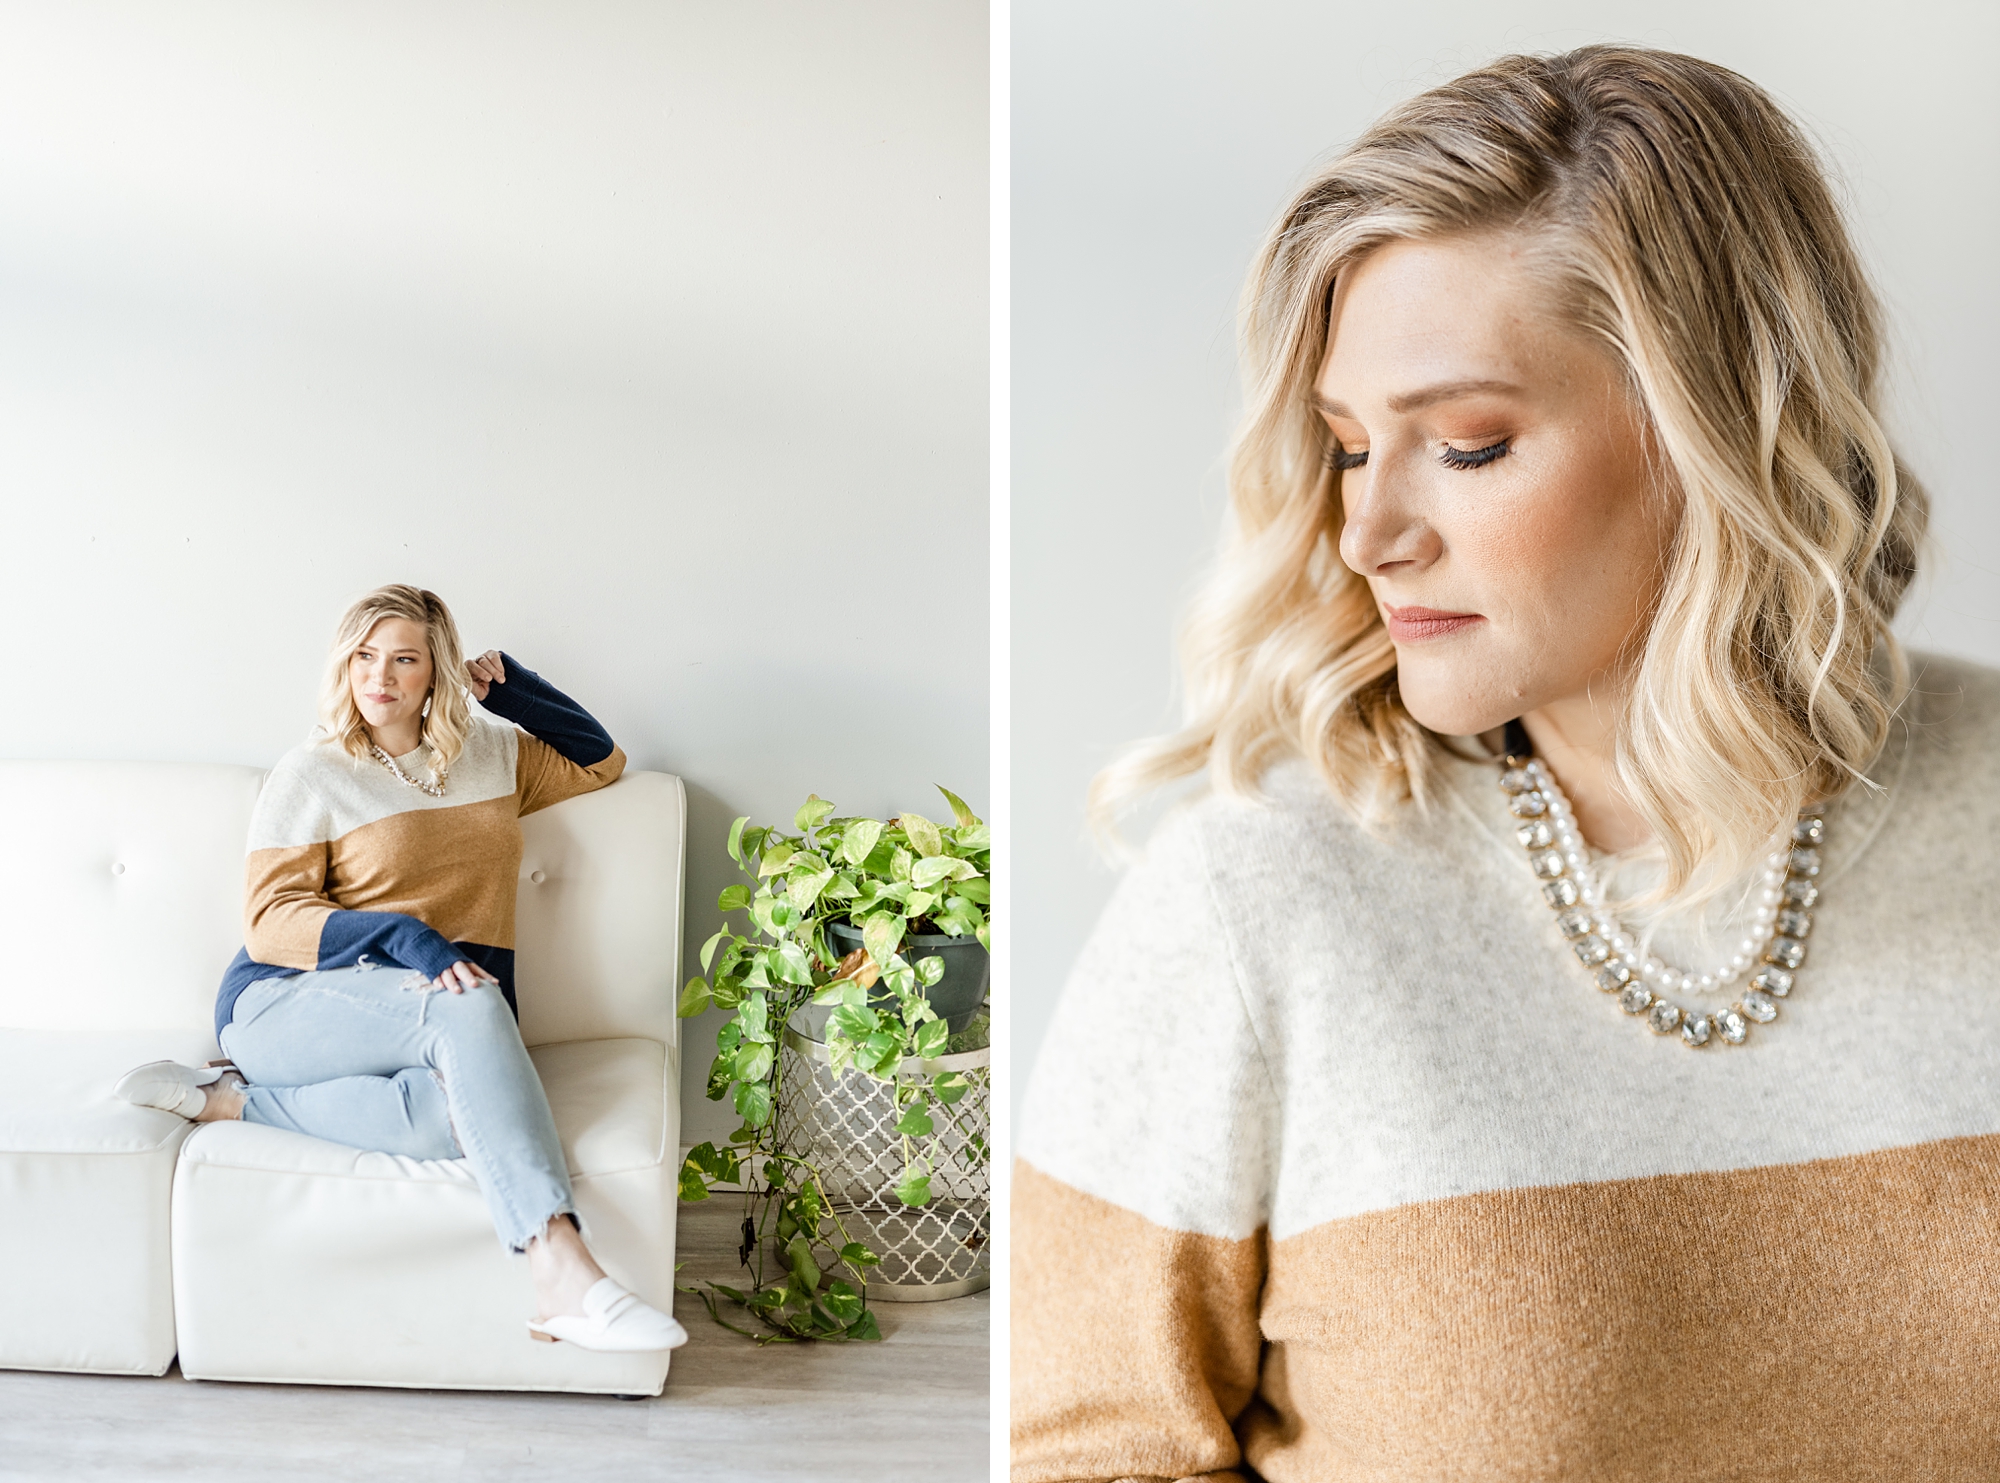 photographer in gold and blue sweater sits on couch